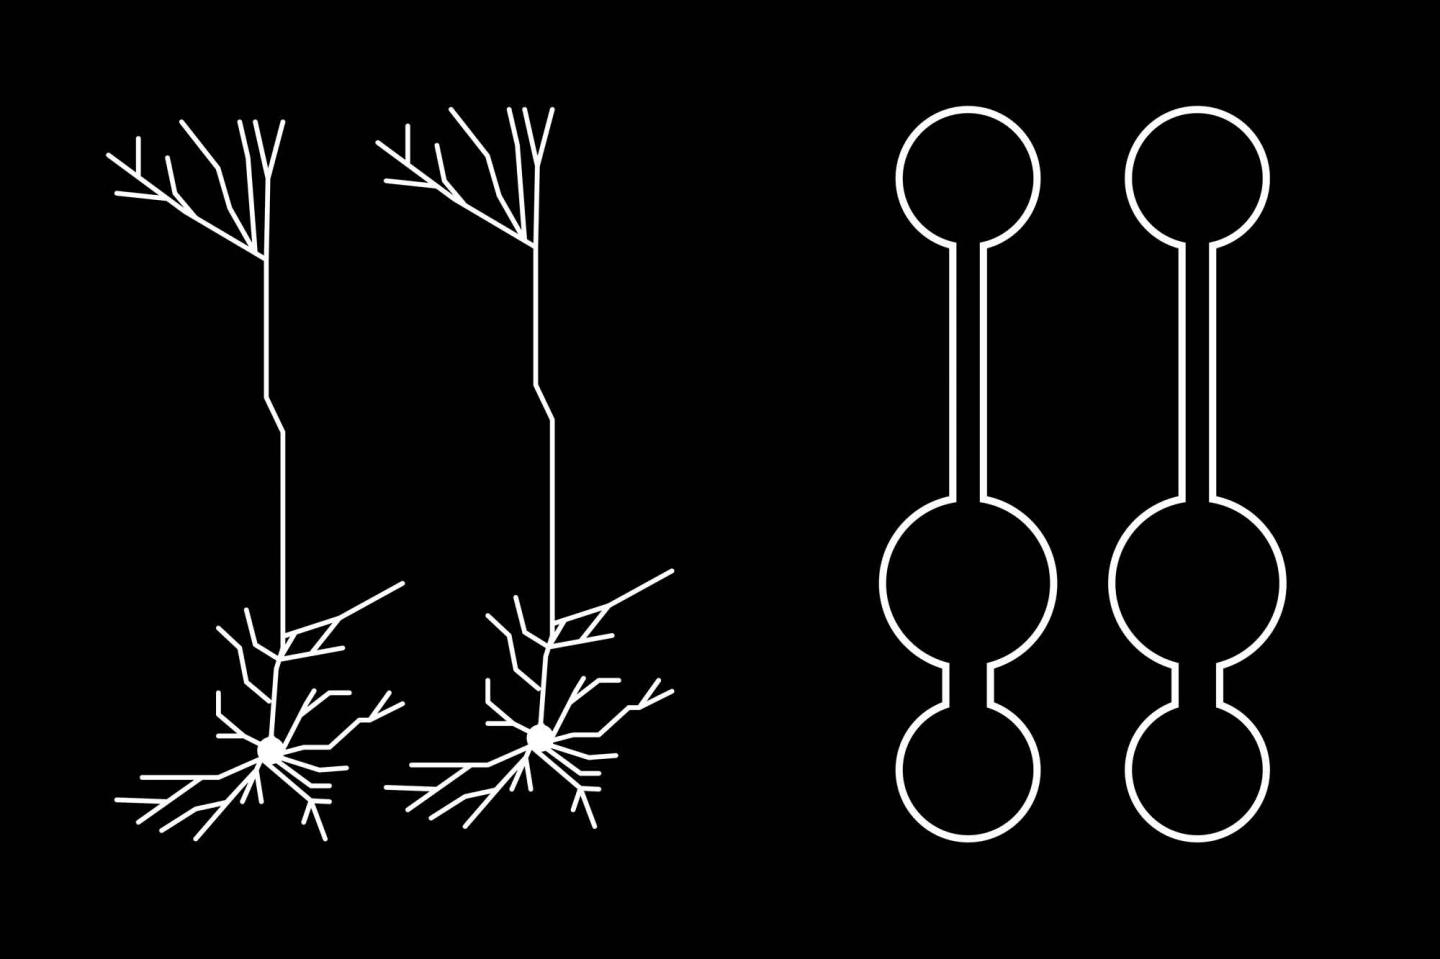 This is an illustration of a multi-compartment neural network model for deep learning. Left: Reconstruction of pyramidal neurons from mouse primary visual cortex. Right: Illustration of simplified pyramidal neuron models.(CIFAR)